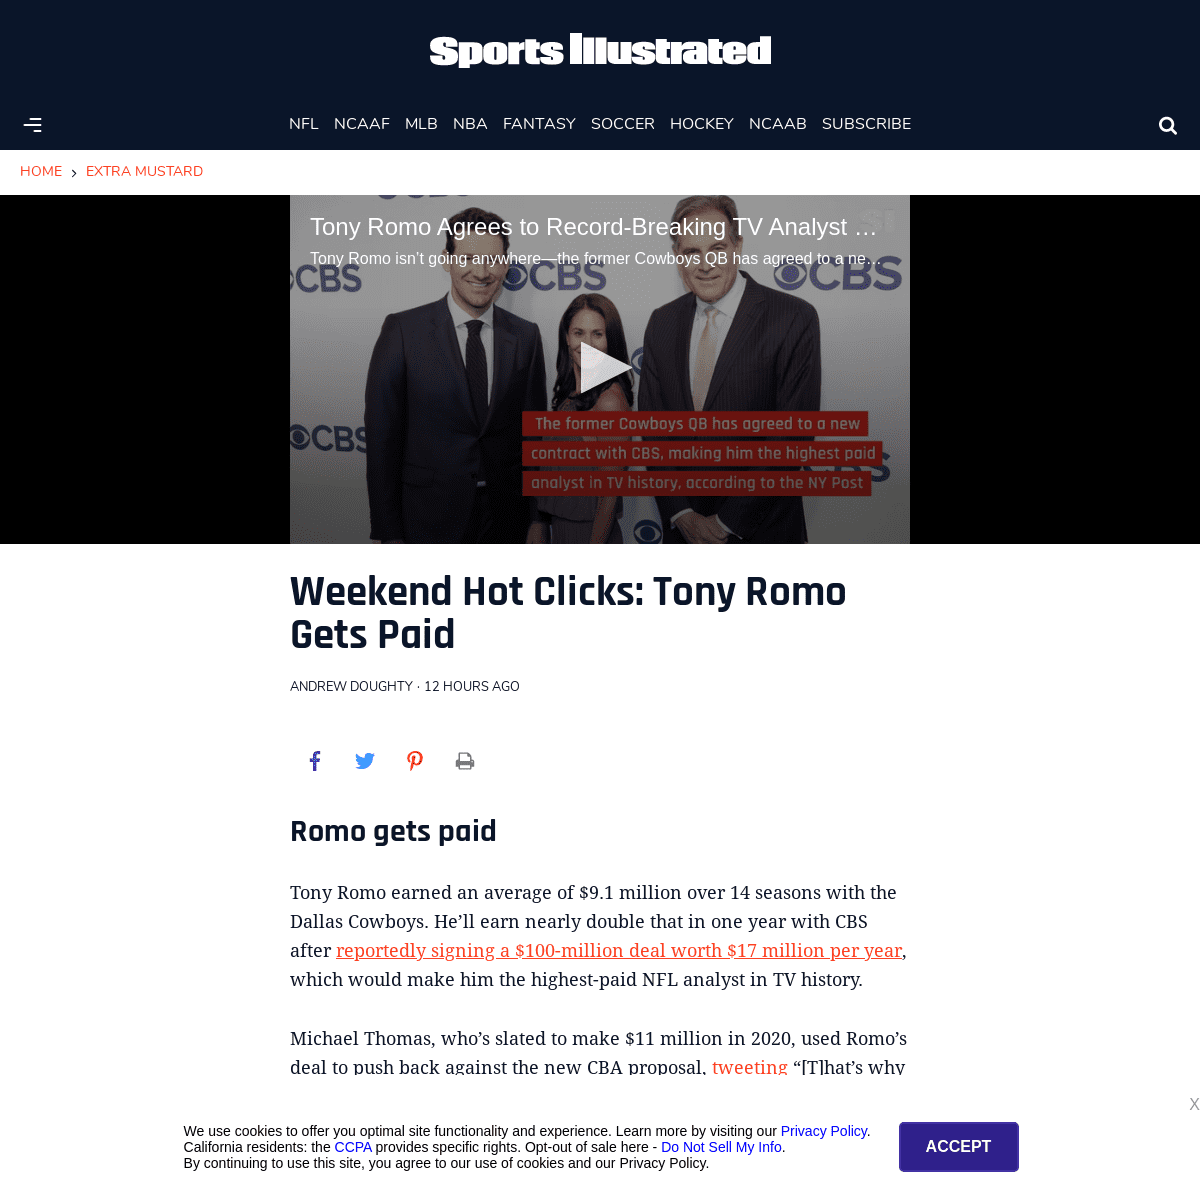 A complete backup of www.si.com/extra-mustard/2020/02/29/romo-cbs-contract-xlf-kickoff-rules-influence